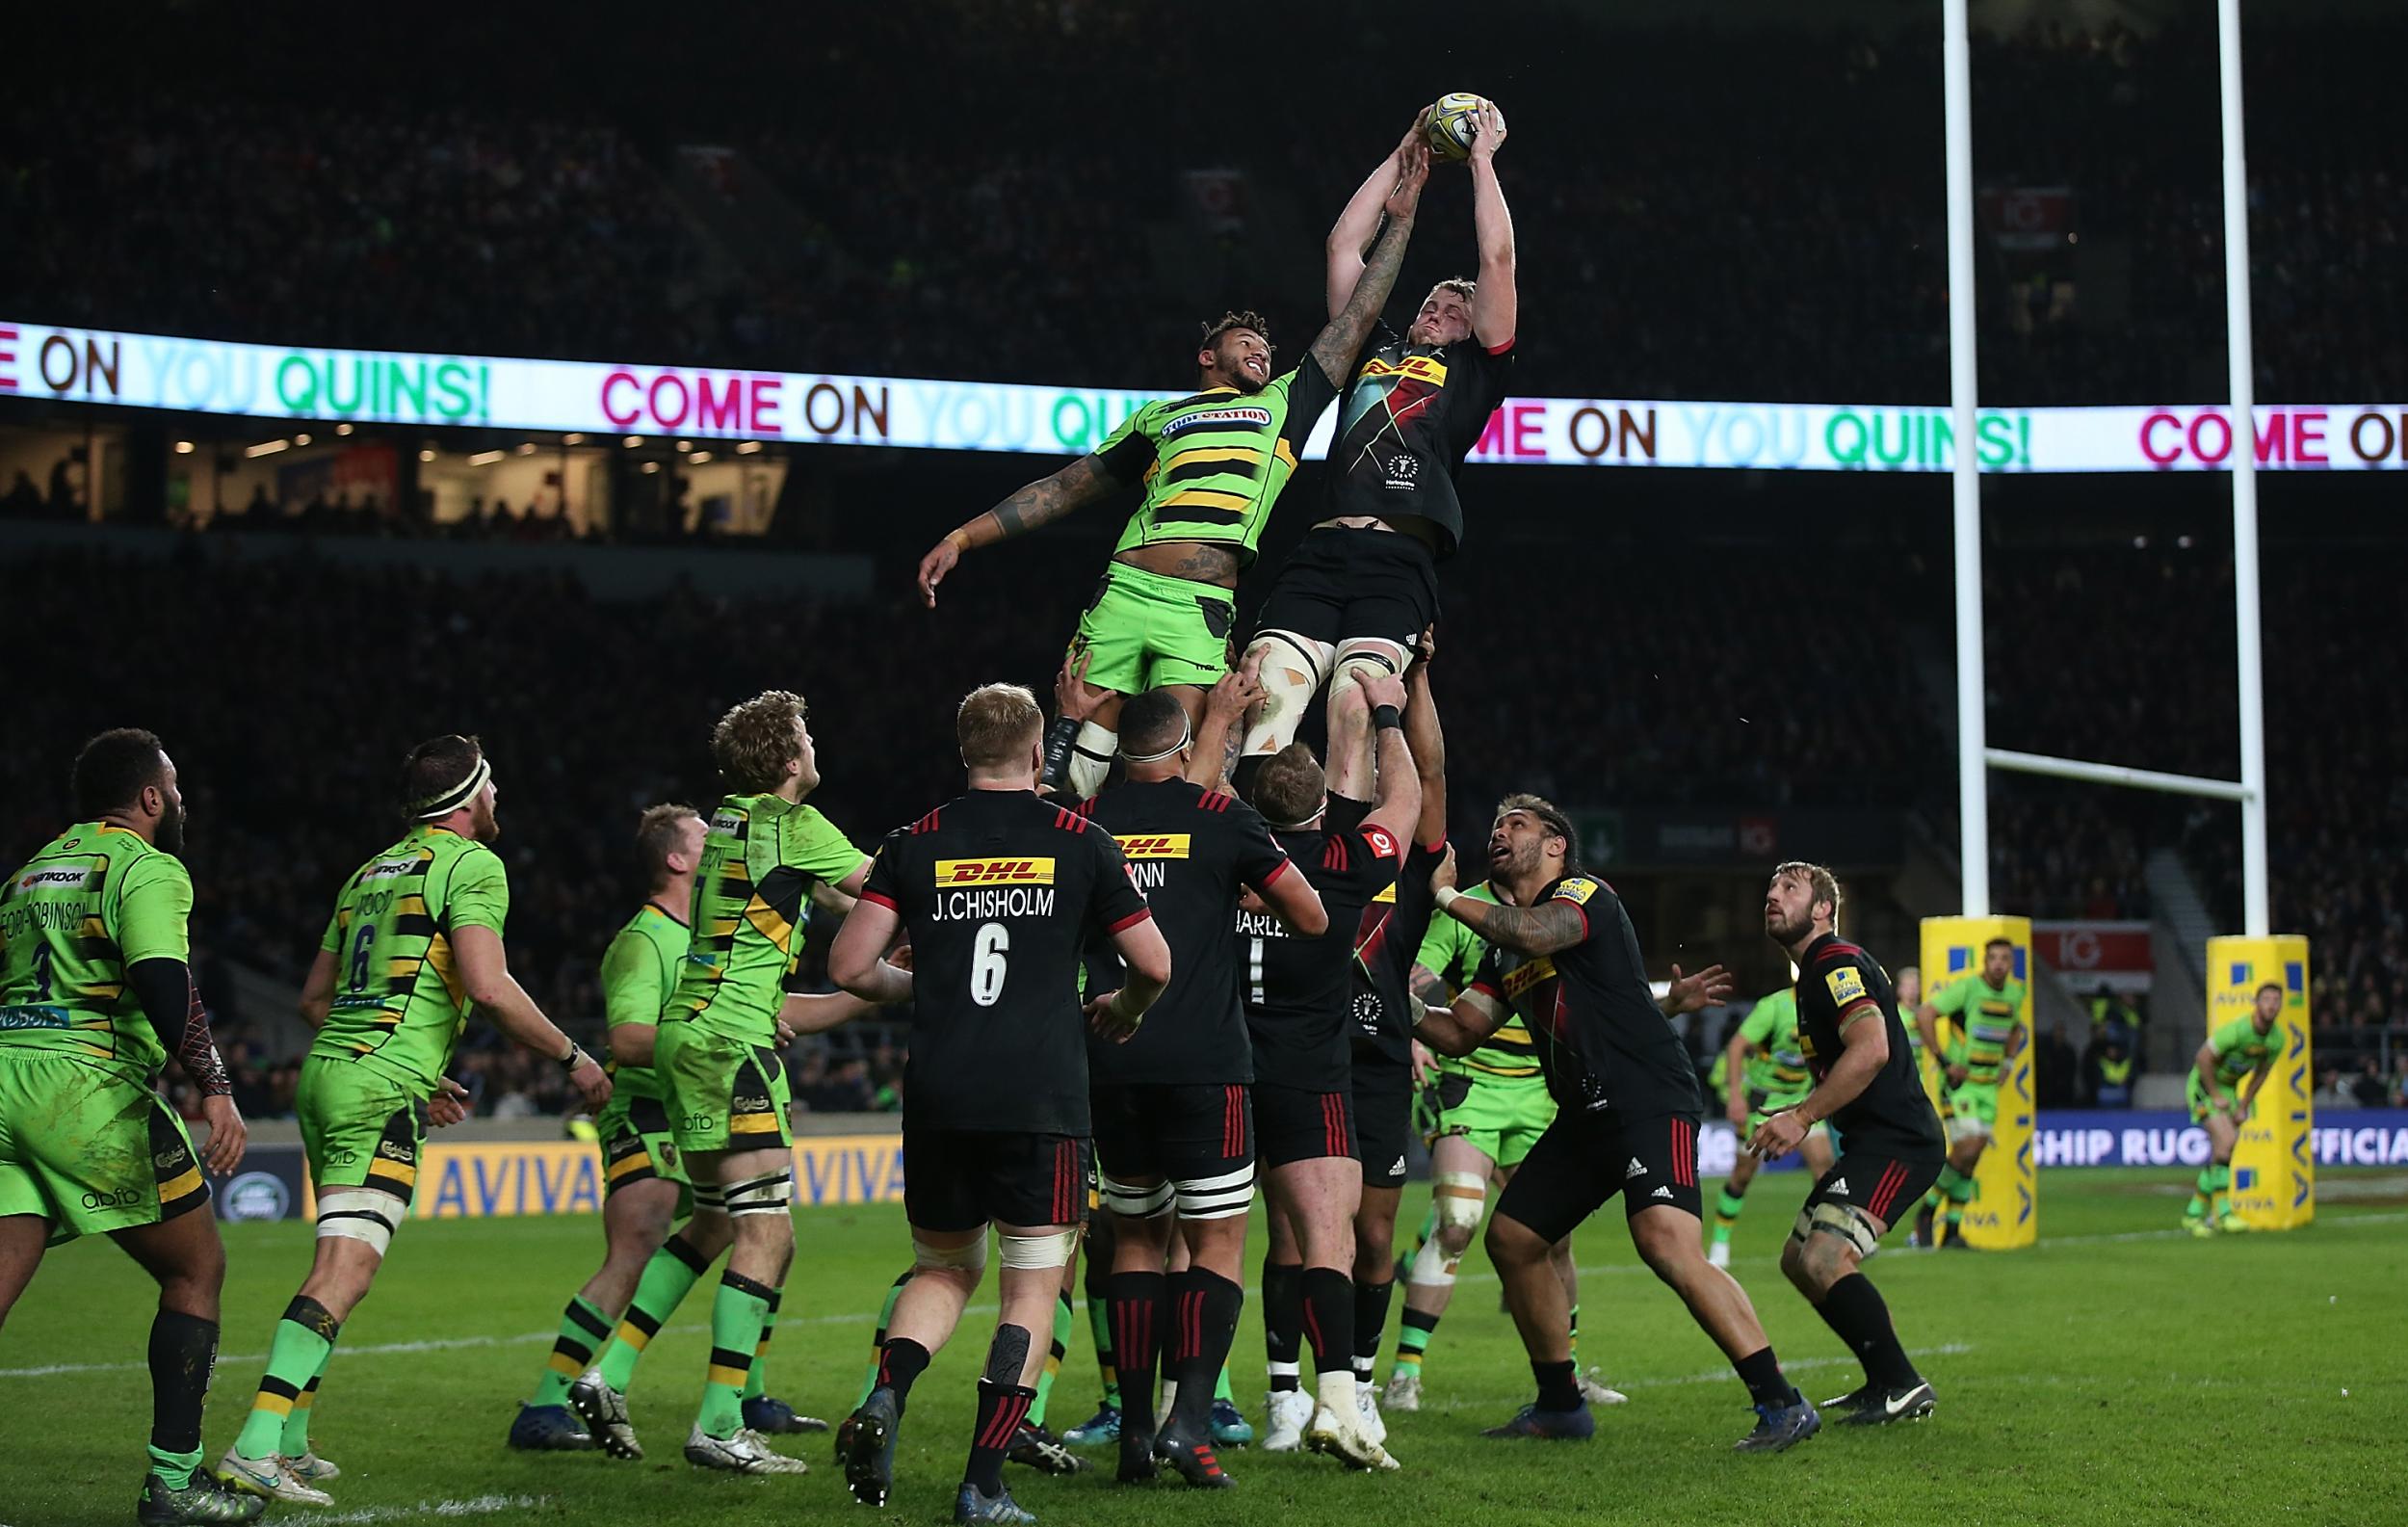 George Merrick wins a lineout under pressure (Getty)